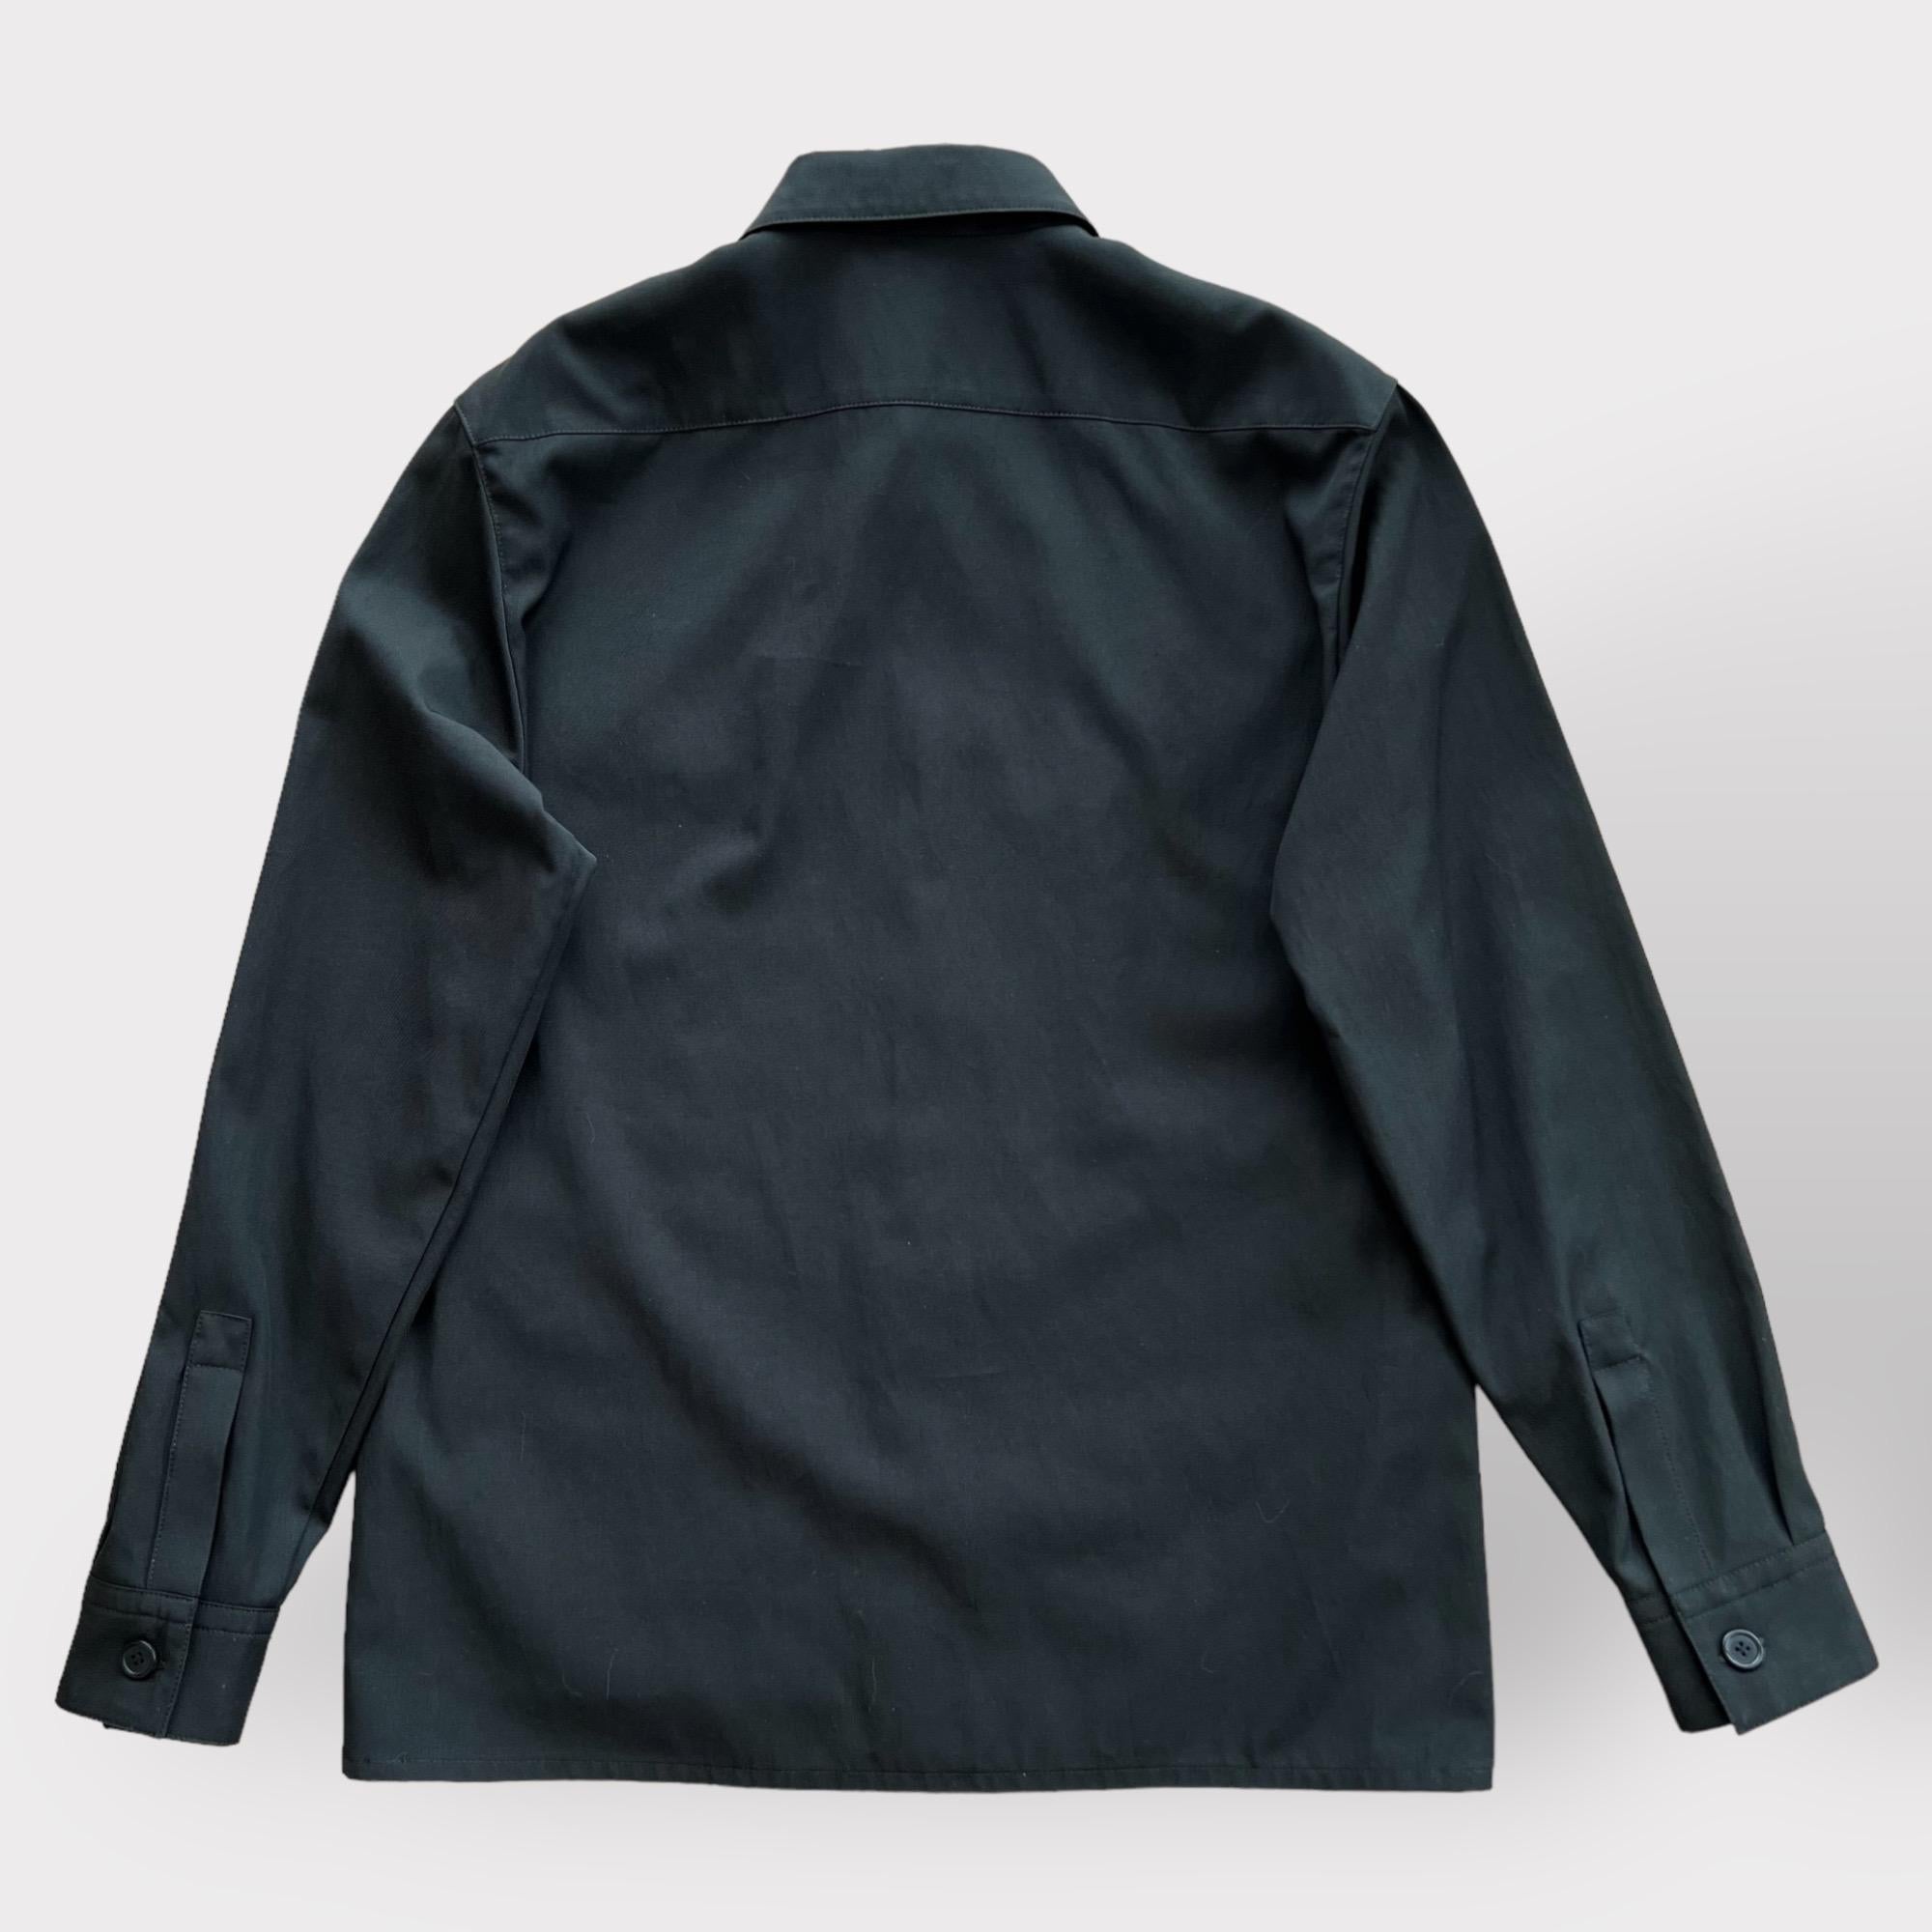 Shop this Men's 'Icones au Carre' Straight Cut Overshirt from the Hermes Spring / Summer 2023 collection. It comes in the classic black colour and features the new season 'Icones au Carre' detailing.

The jacket is made from 54% Viscose and 46%